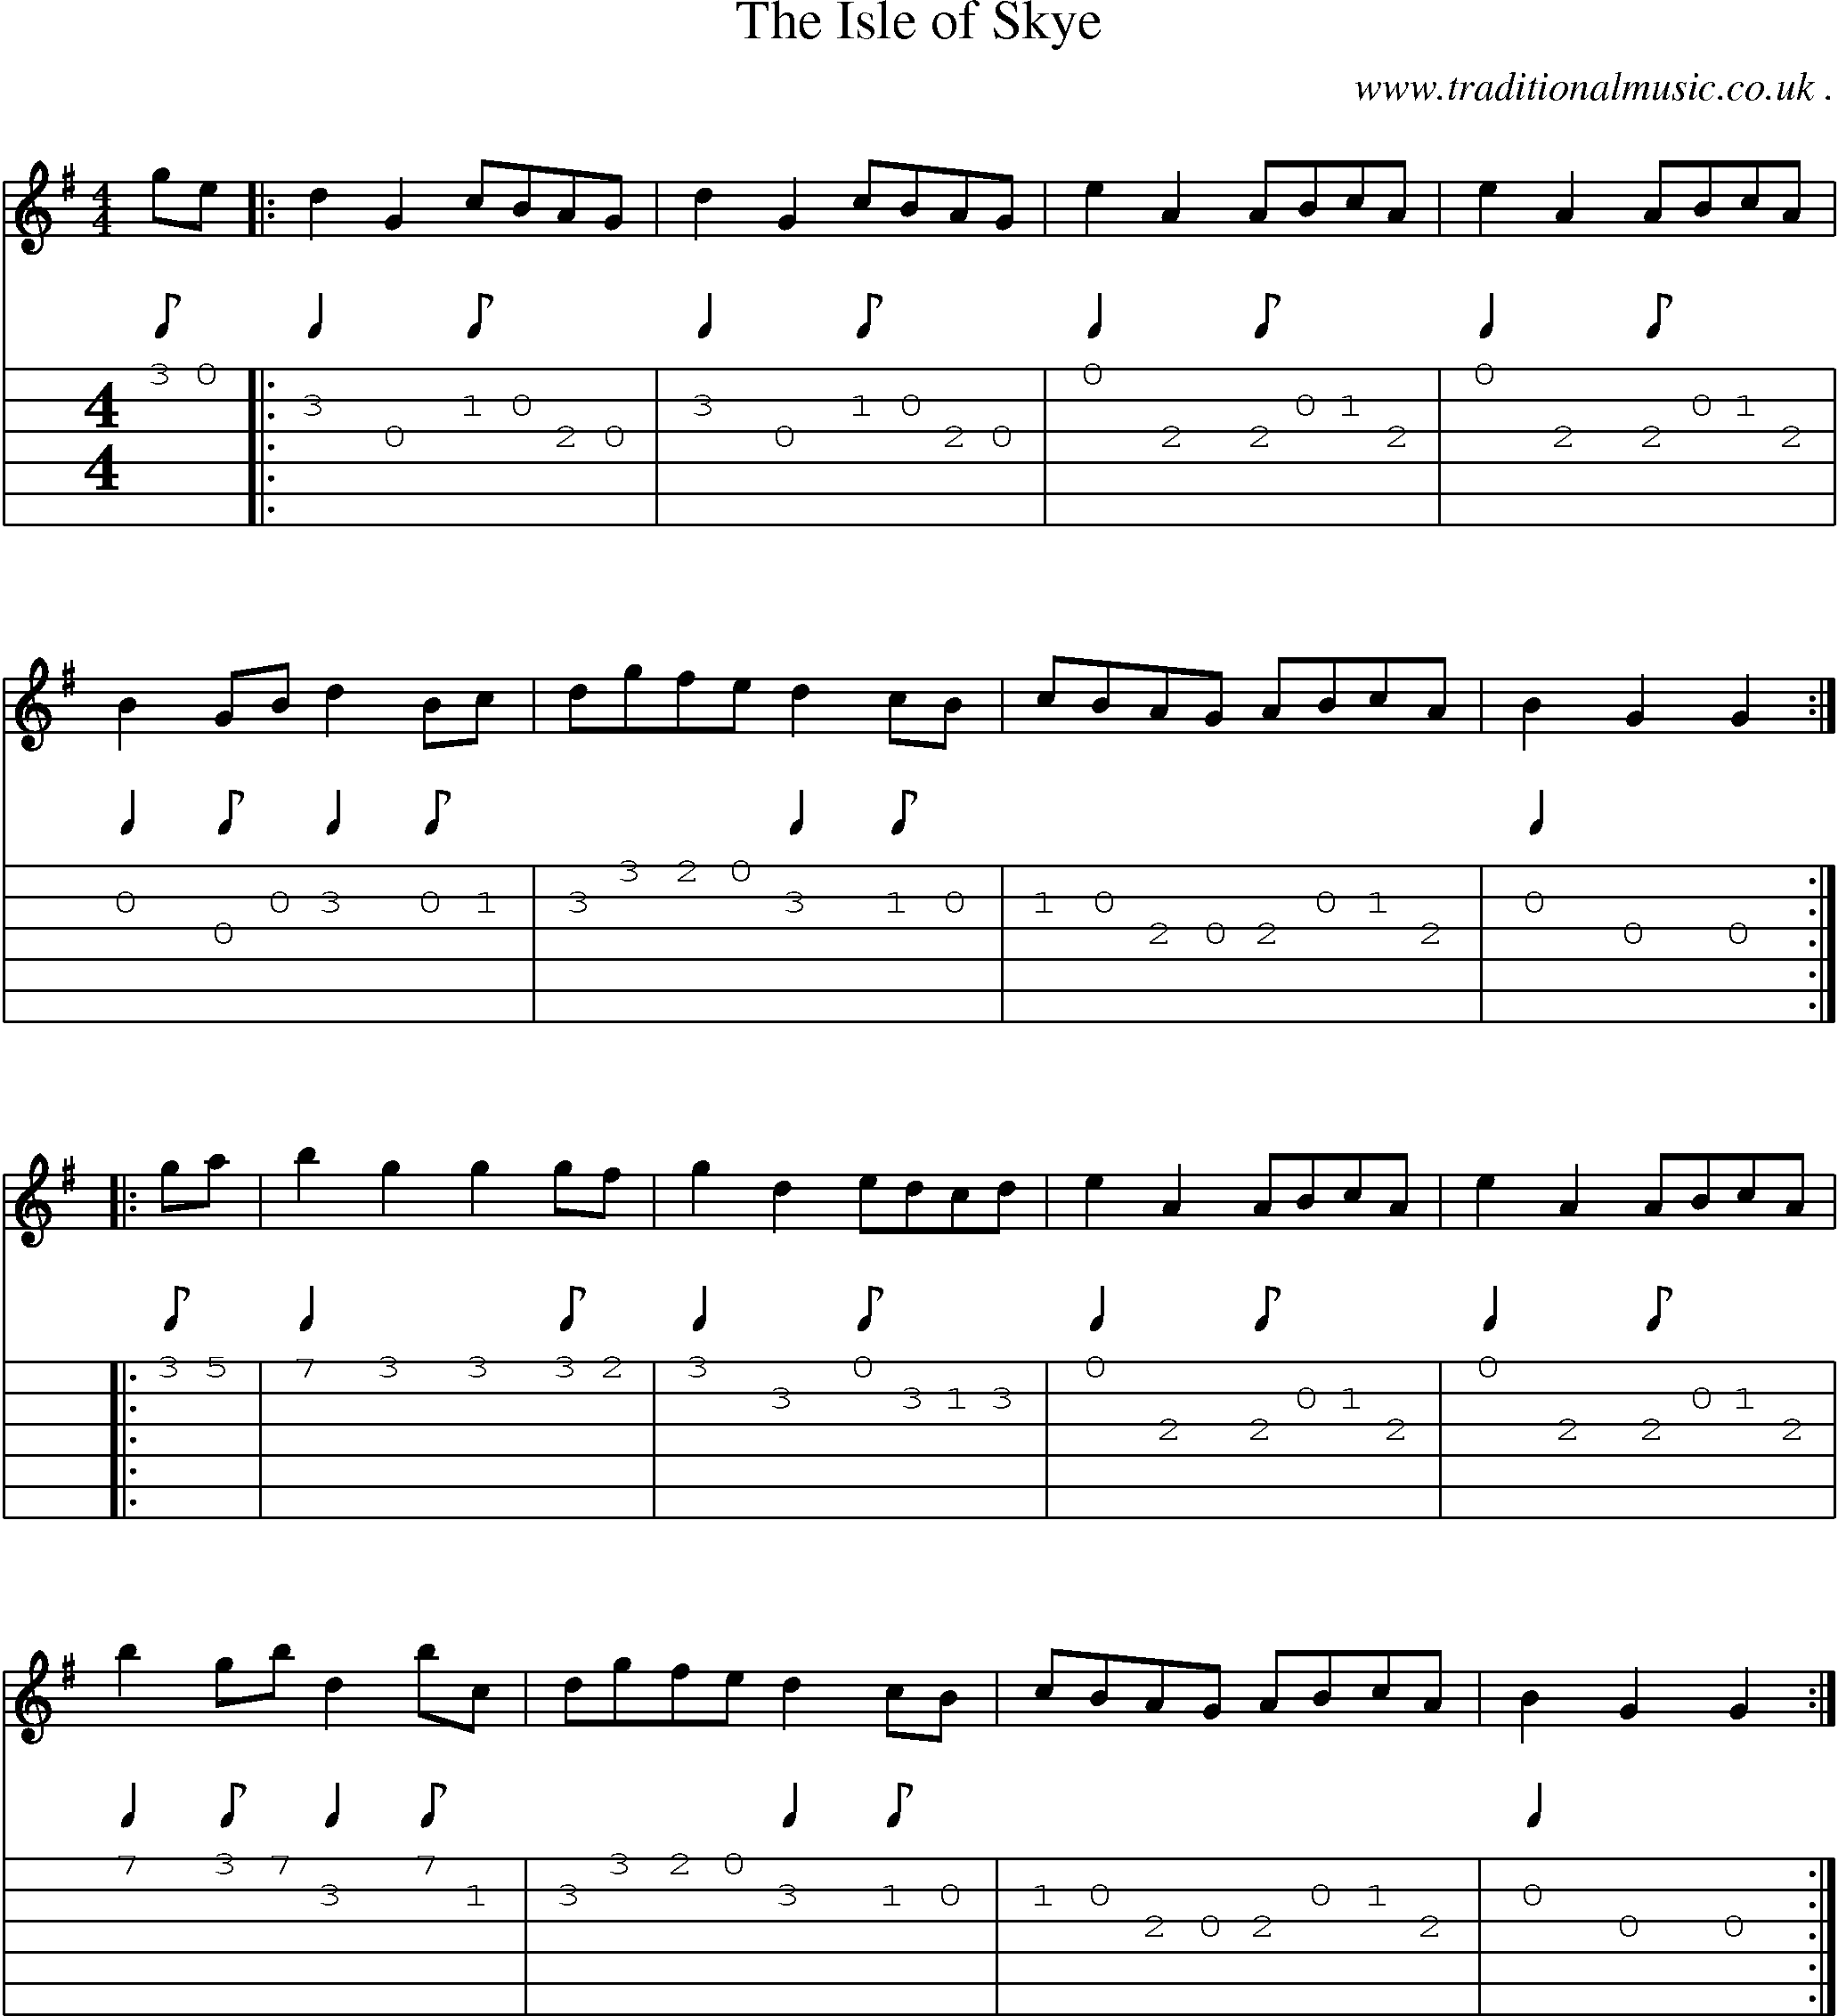 Sheet-Music and Guitar Tabs for The Isle Of Skye